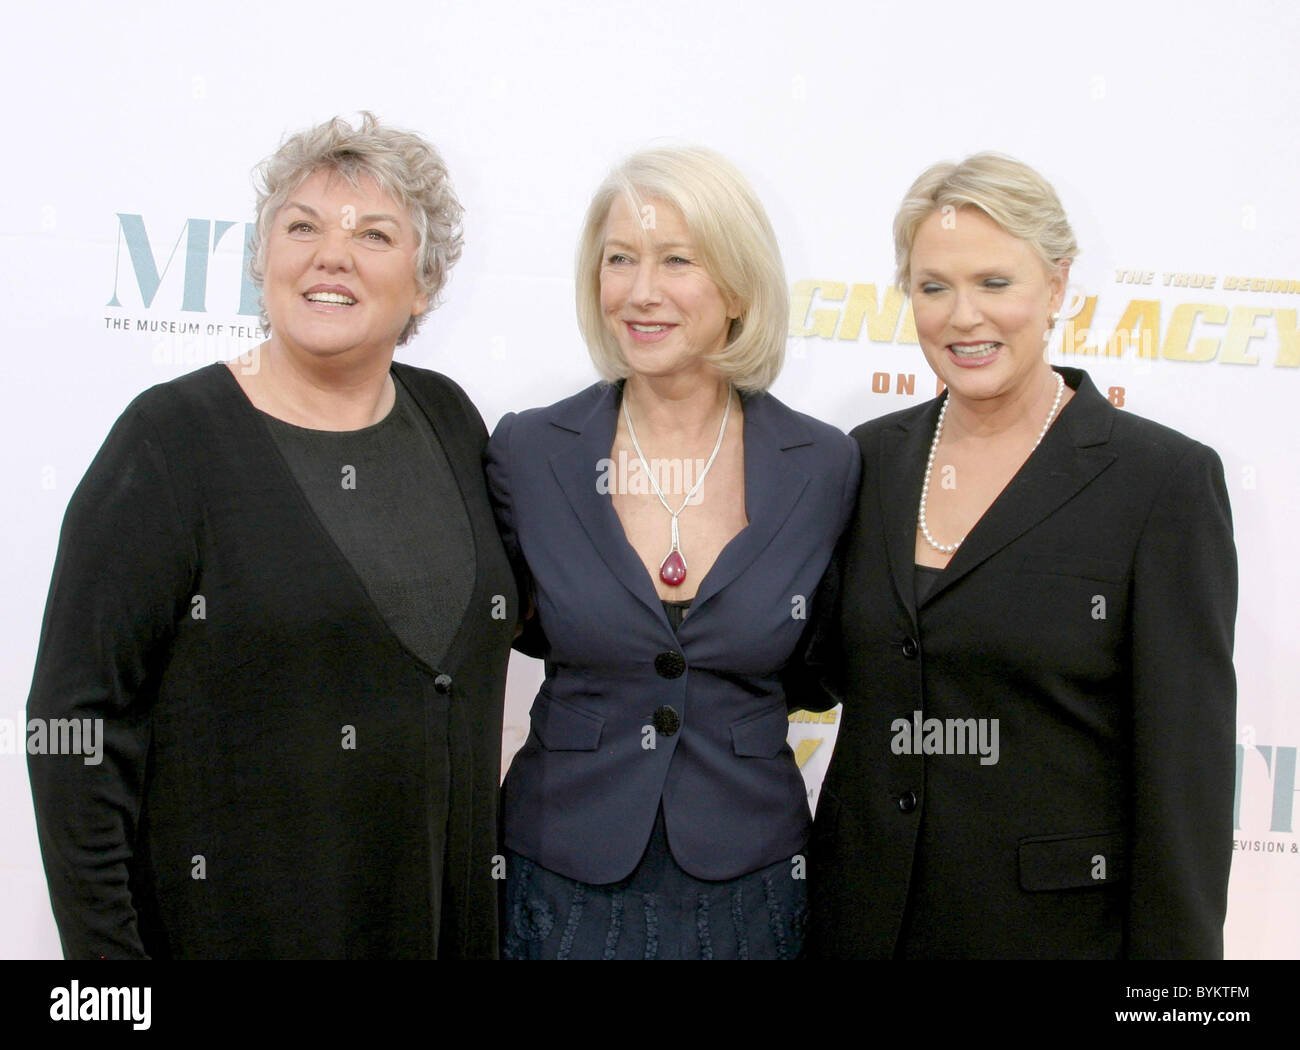 Tyne Daly, Helen Mirren and Sharon Gless 'Cagney & Lacey' DVD launch Museum of Television & Radio Beverly Hills, California - Stock Photo